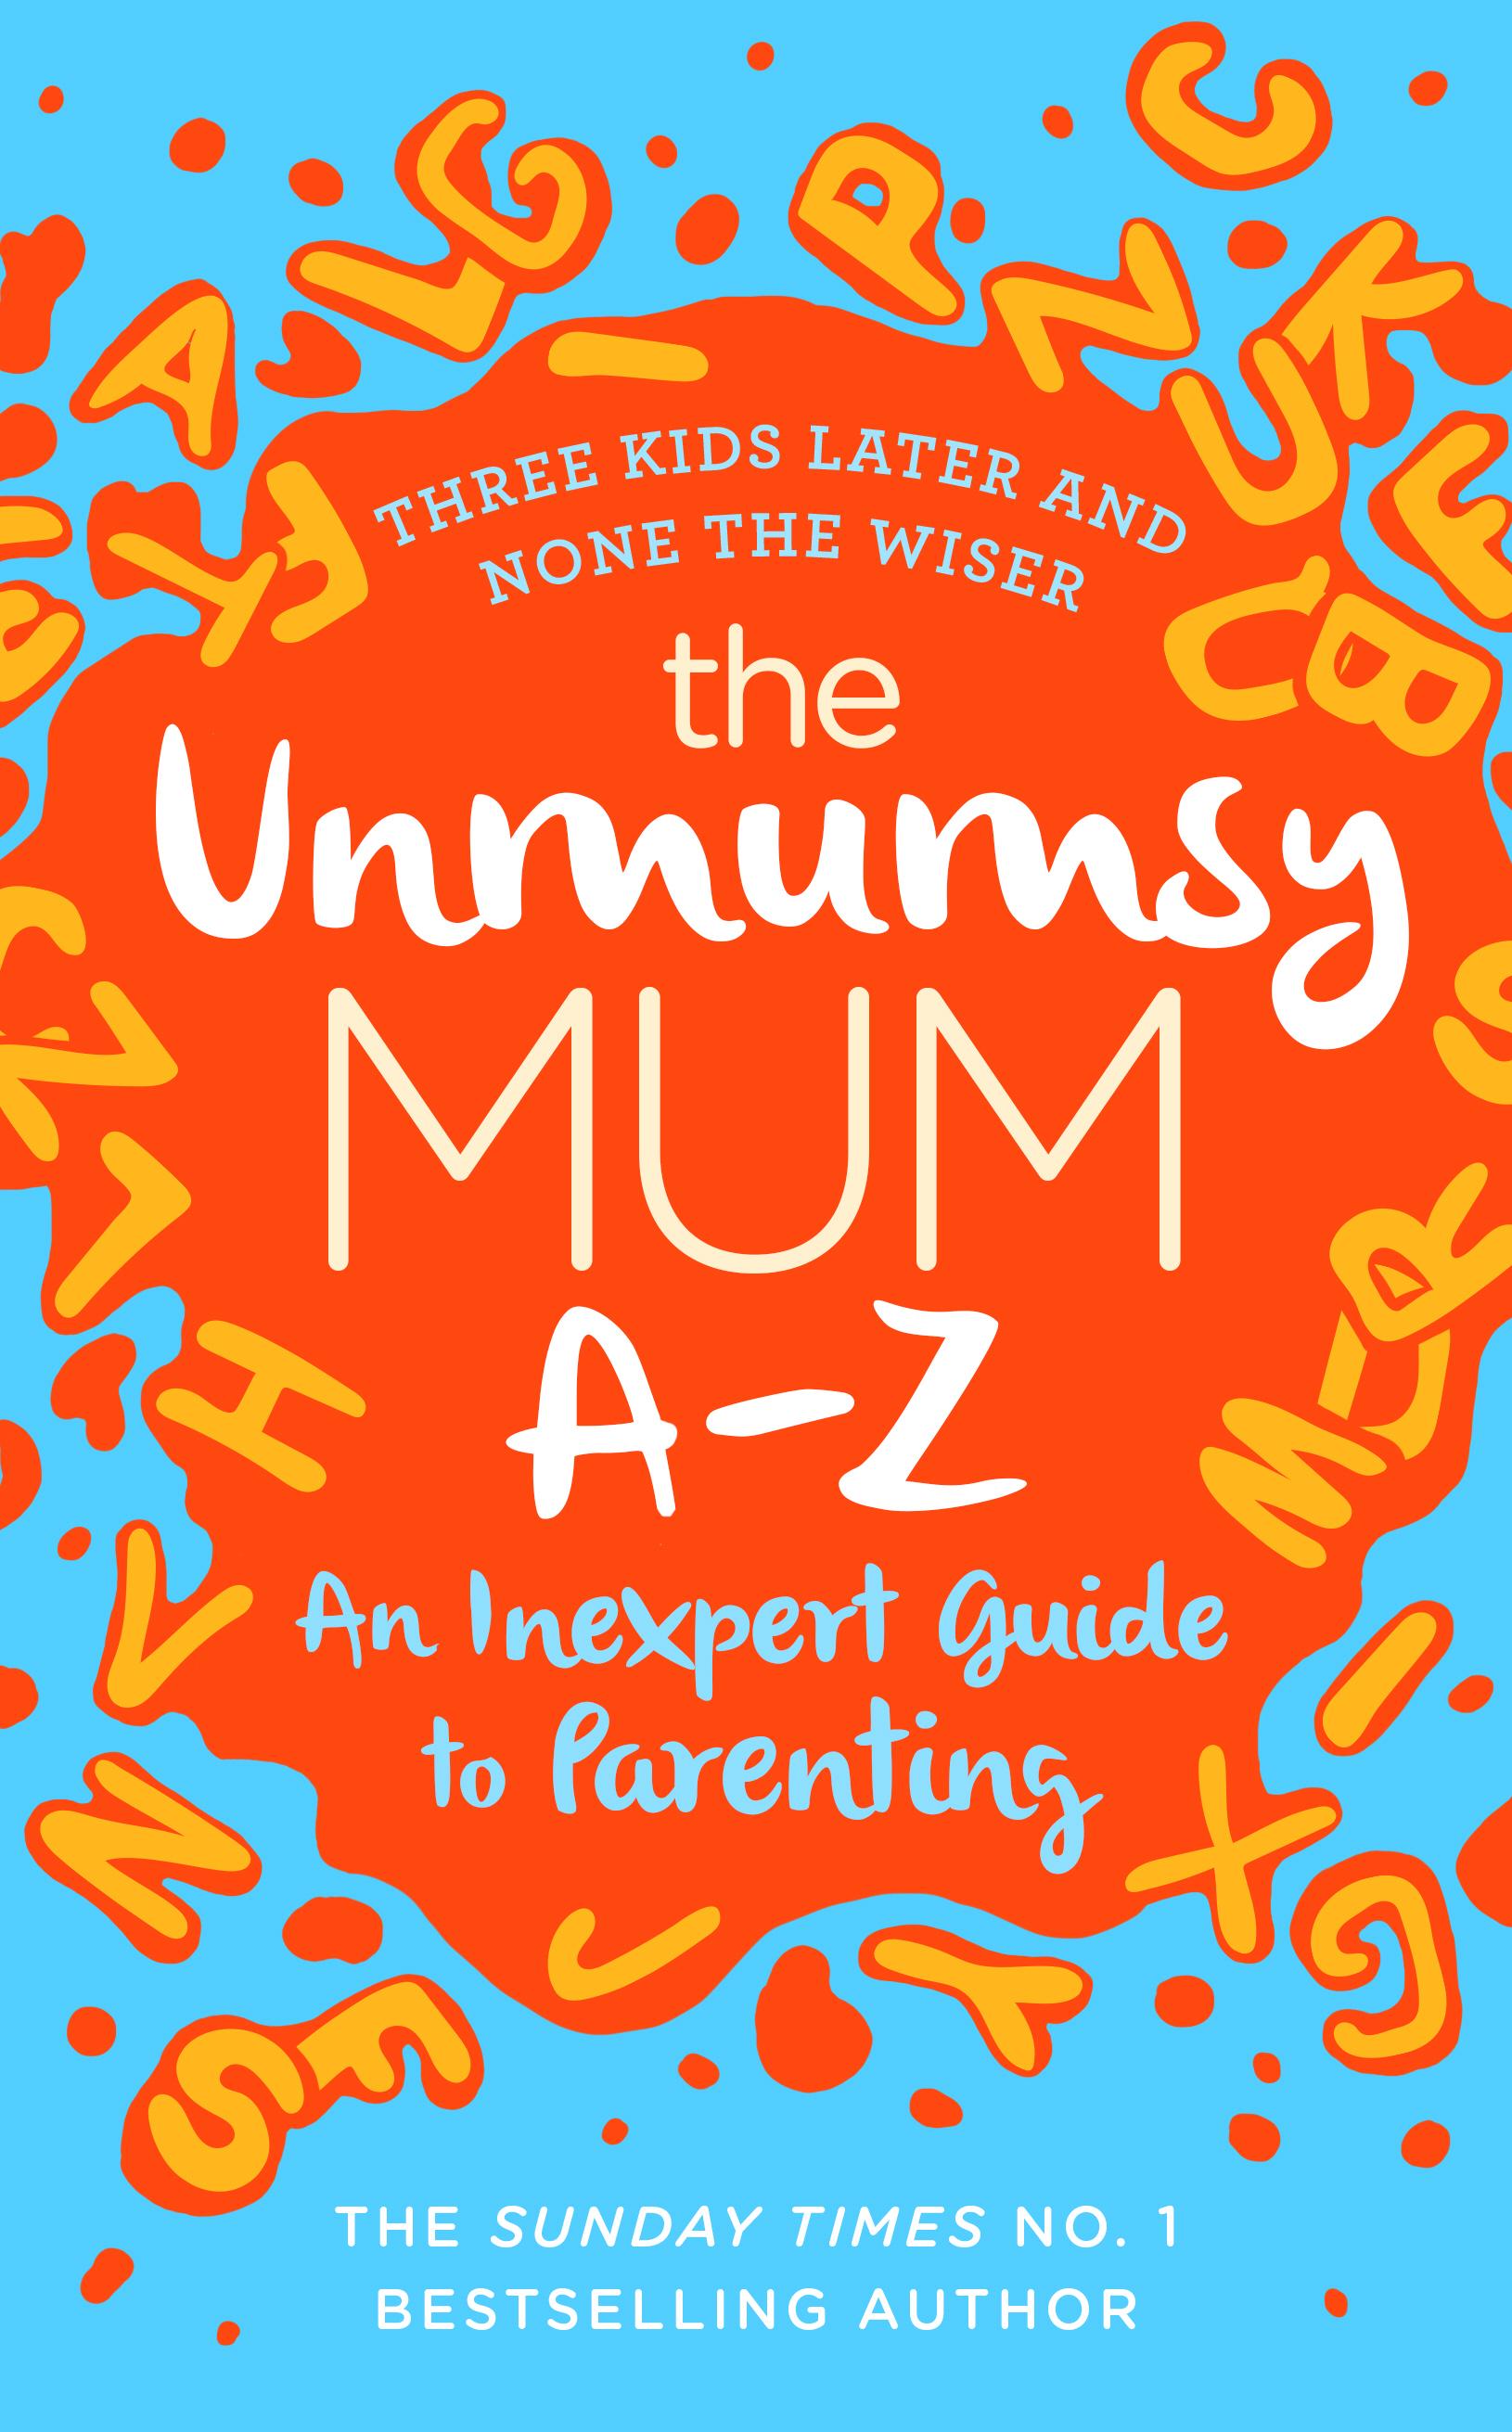 Unmumsy Mum A-Z - An Inexpert Guide to Parenting -  